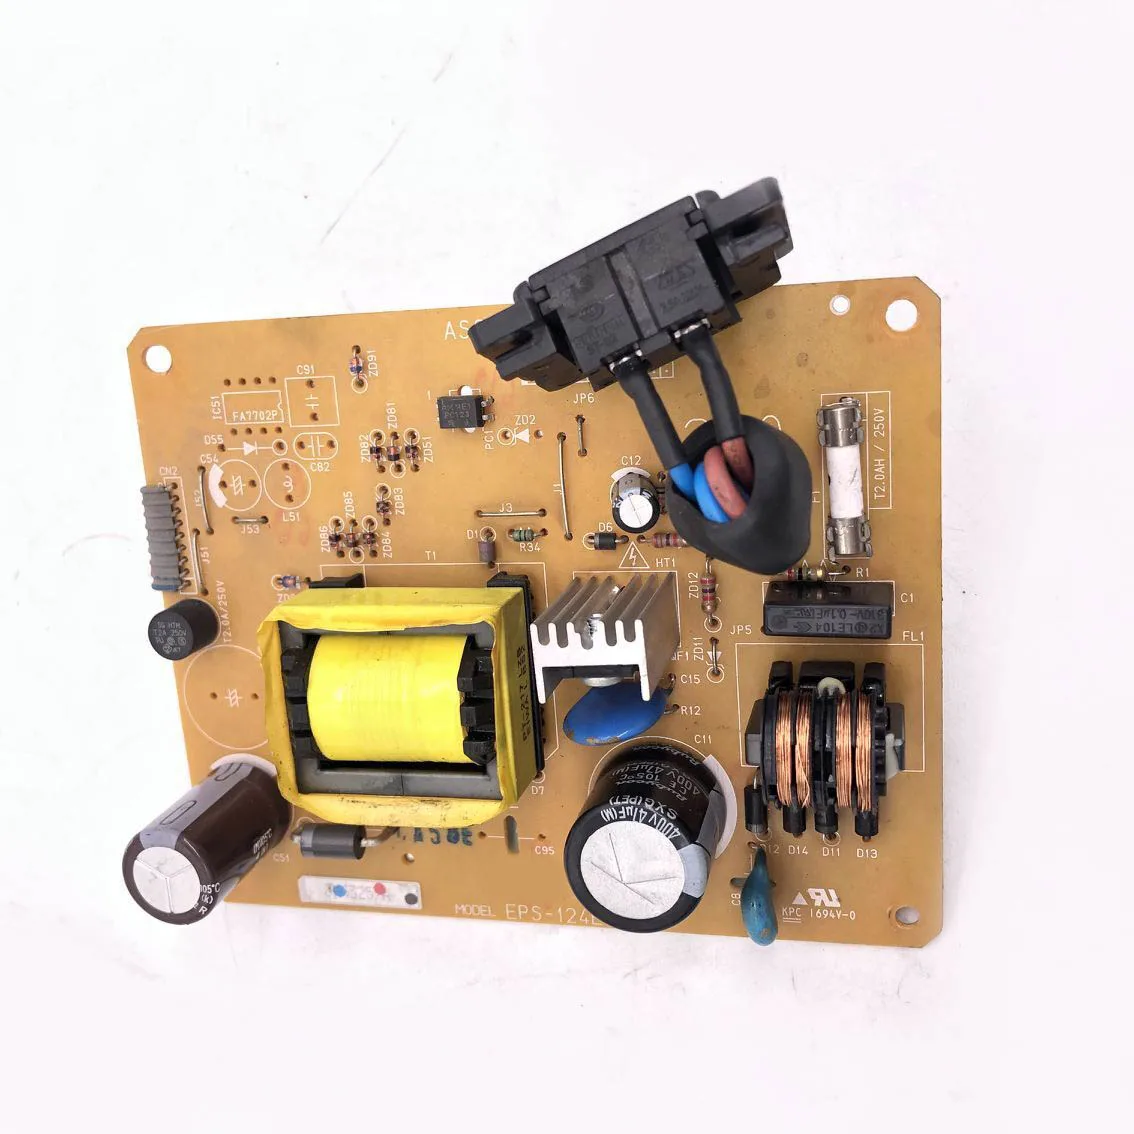 

Power supply board EPS-1100 C695 PSE fits for EPSON L1800 1410 1390 1500 G4500 ep-4004 EP4004 1500W L1800 1400 ep4001 1430w 1430